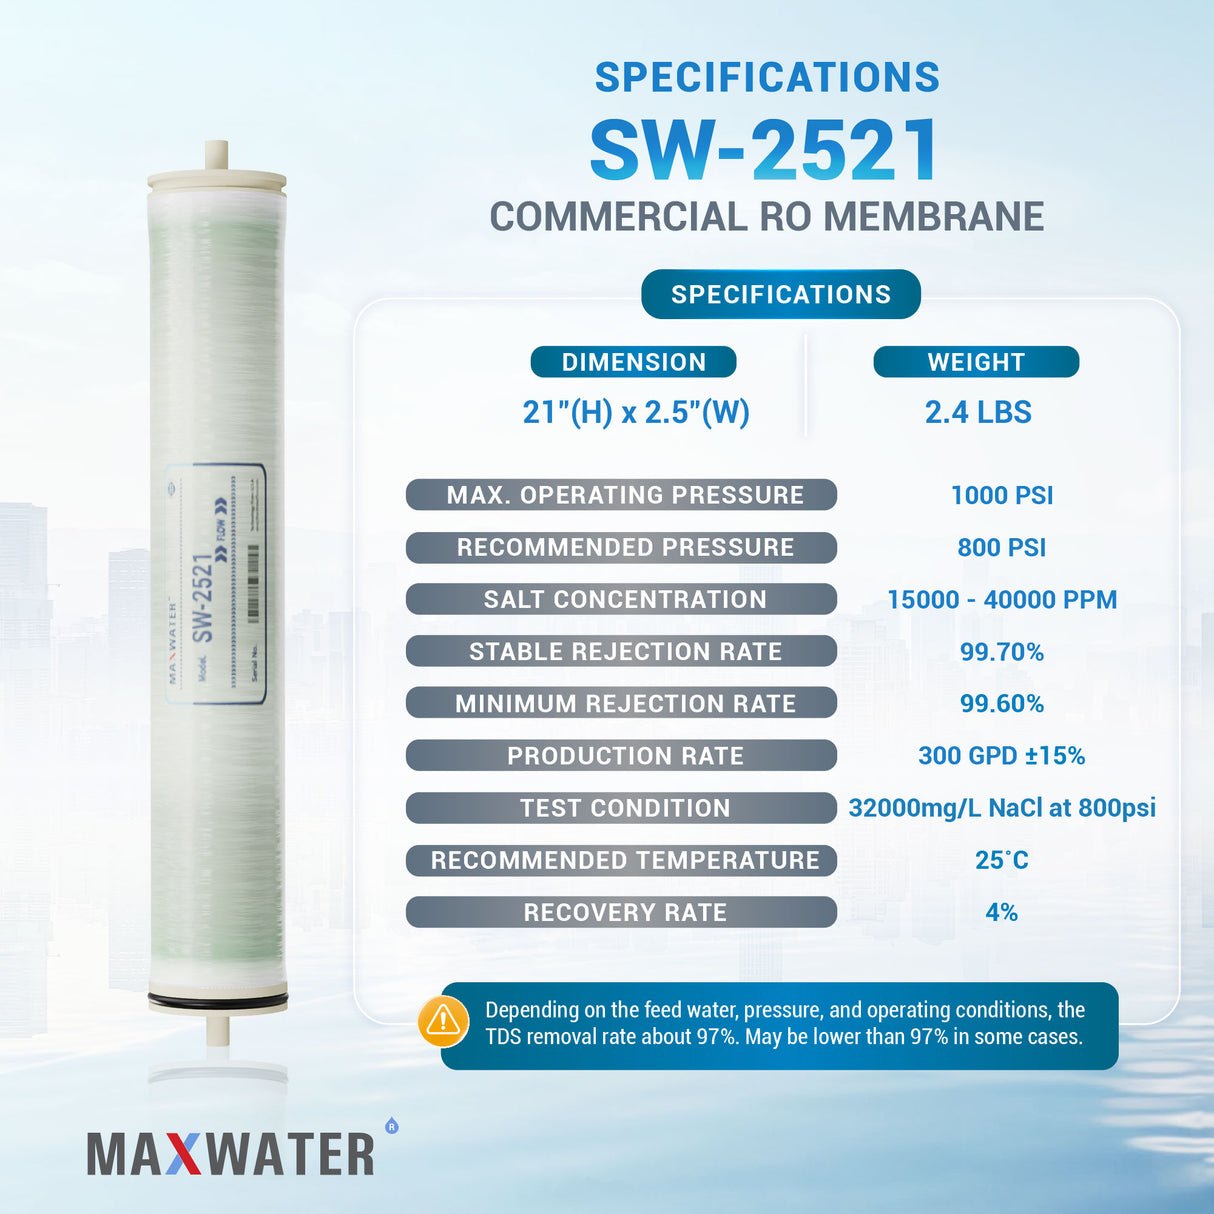 RO membrane 2521 for commercial use